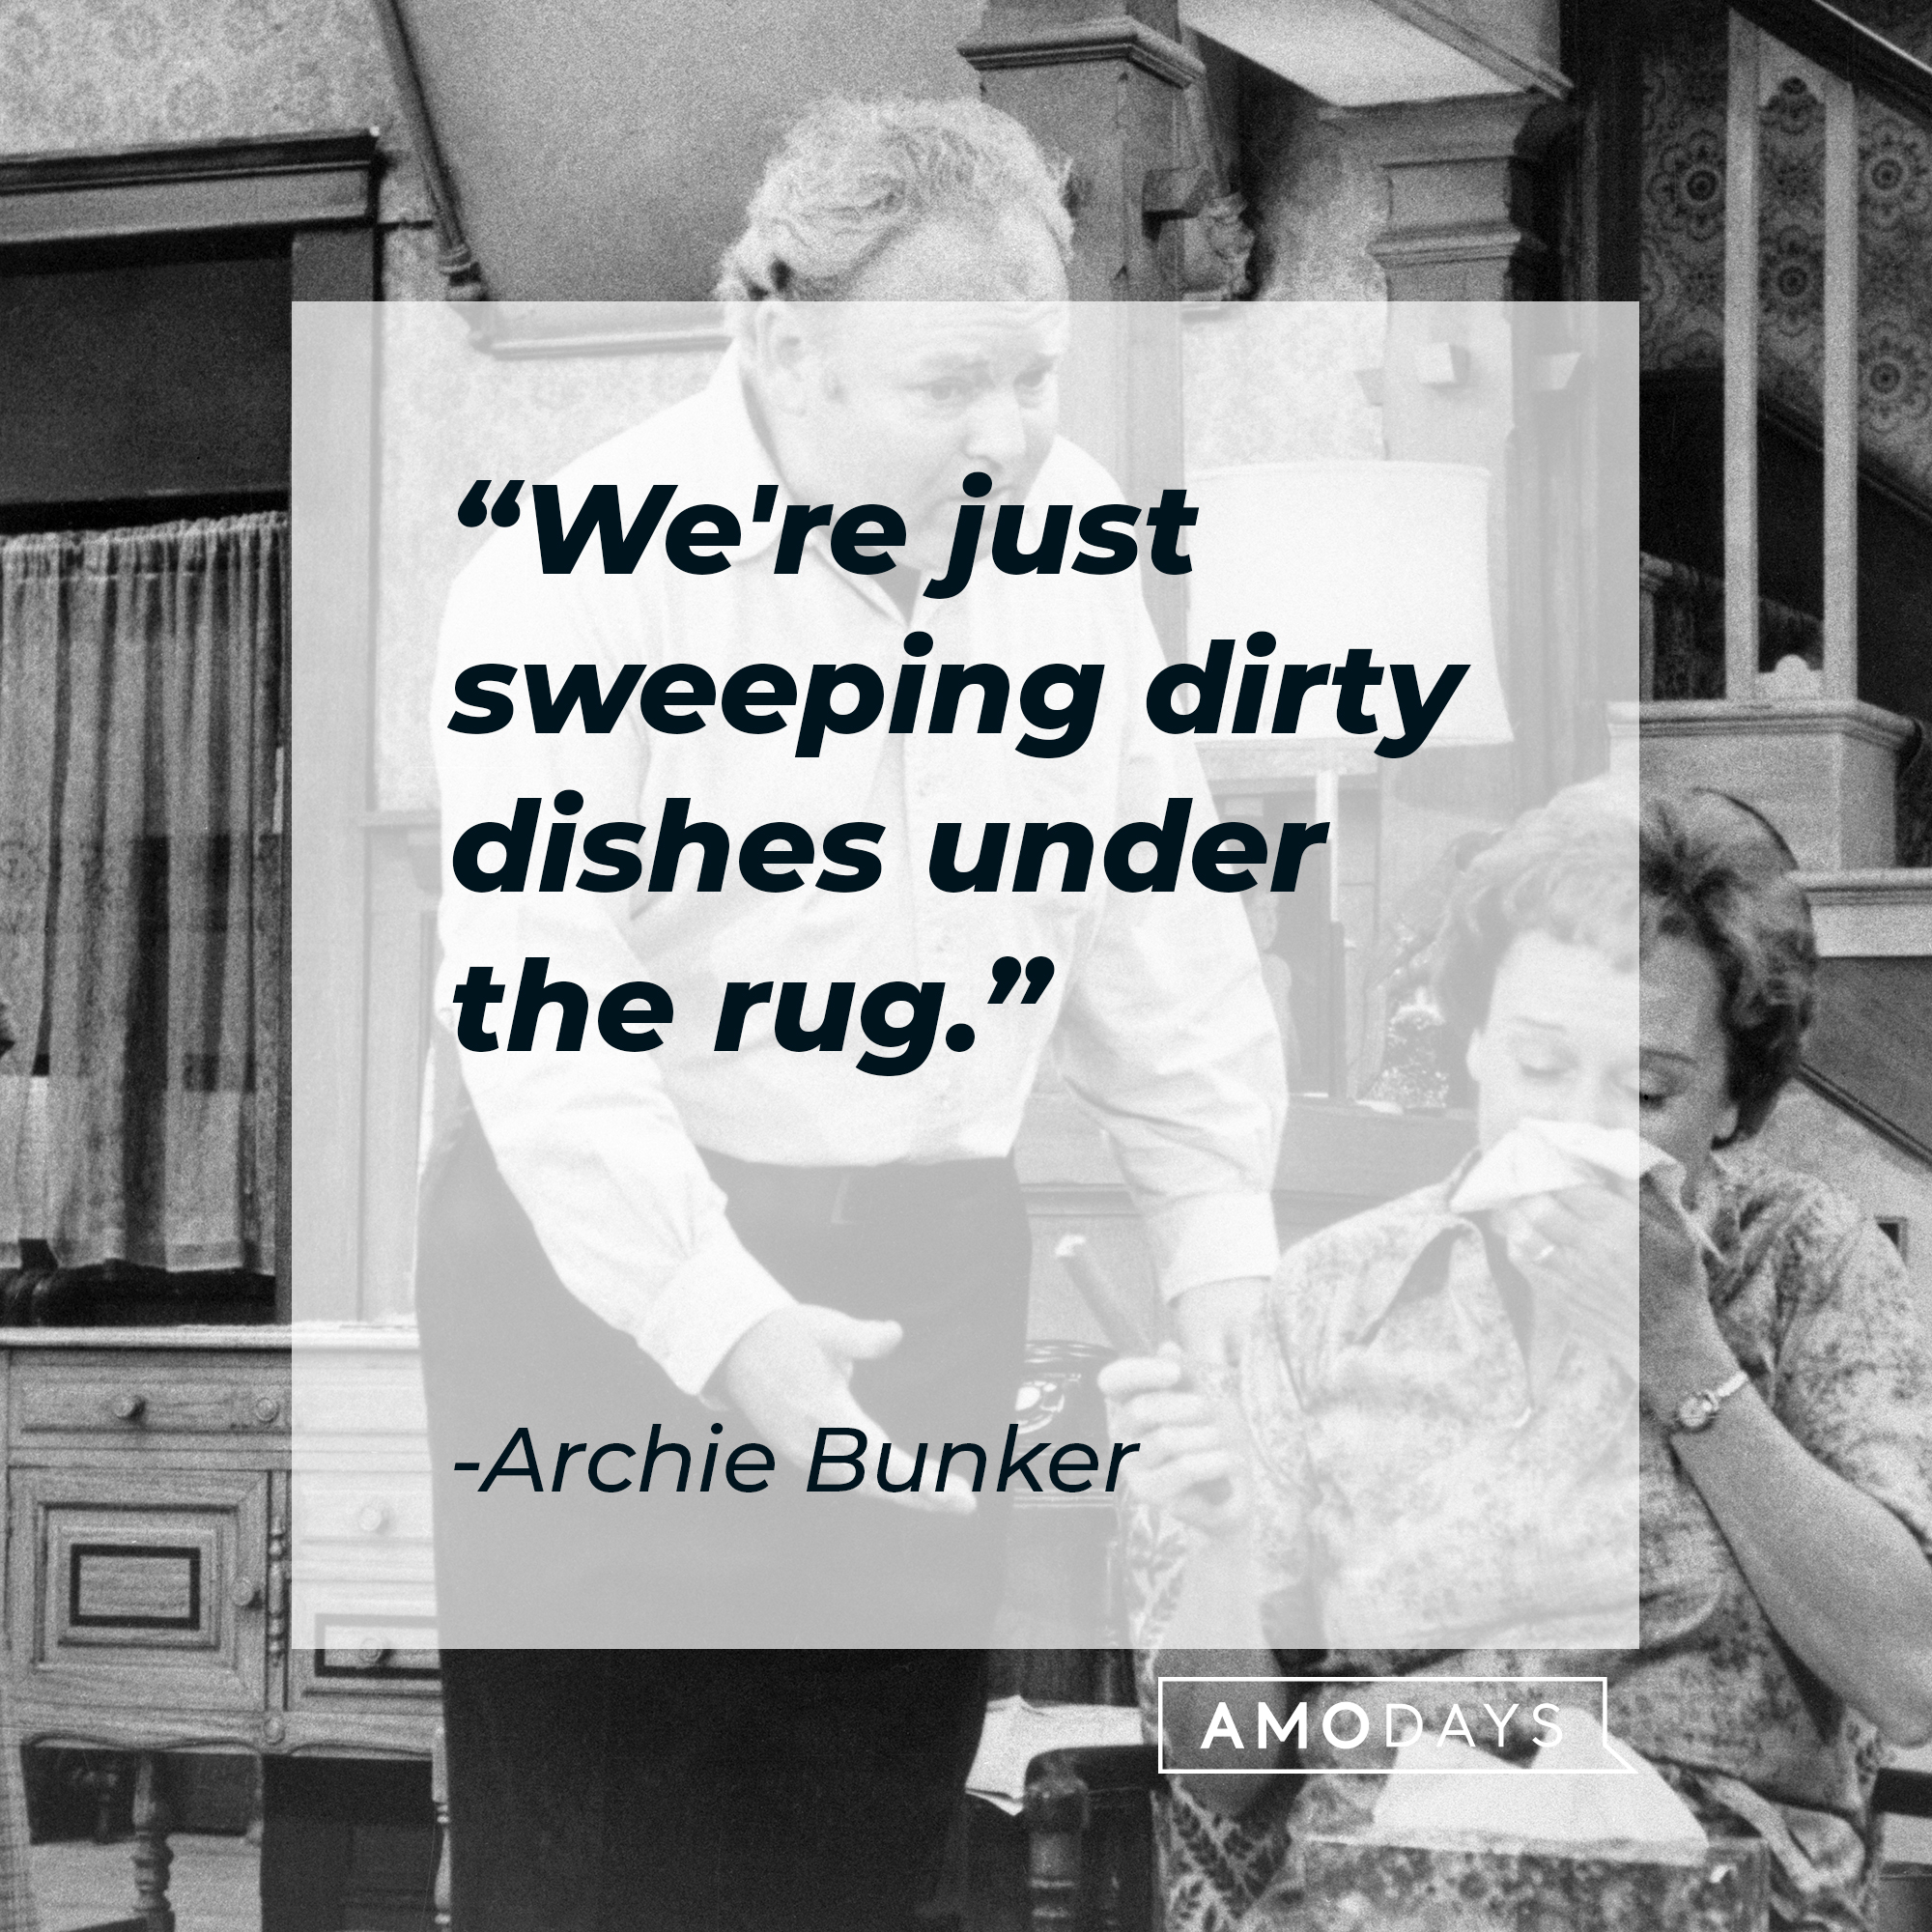 Archie Bunker's quote, "We're just sweeping dirty dishes under the rug." | Source: Getty Images